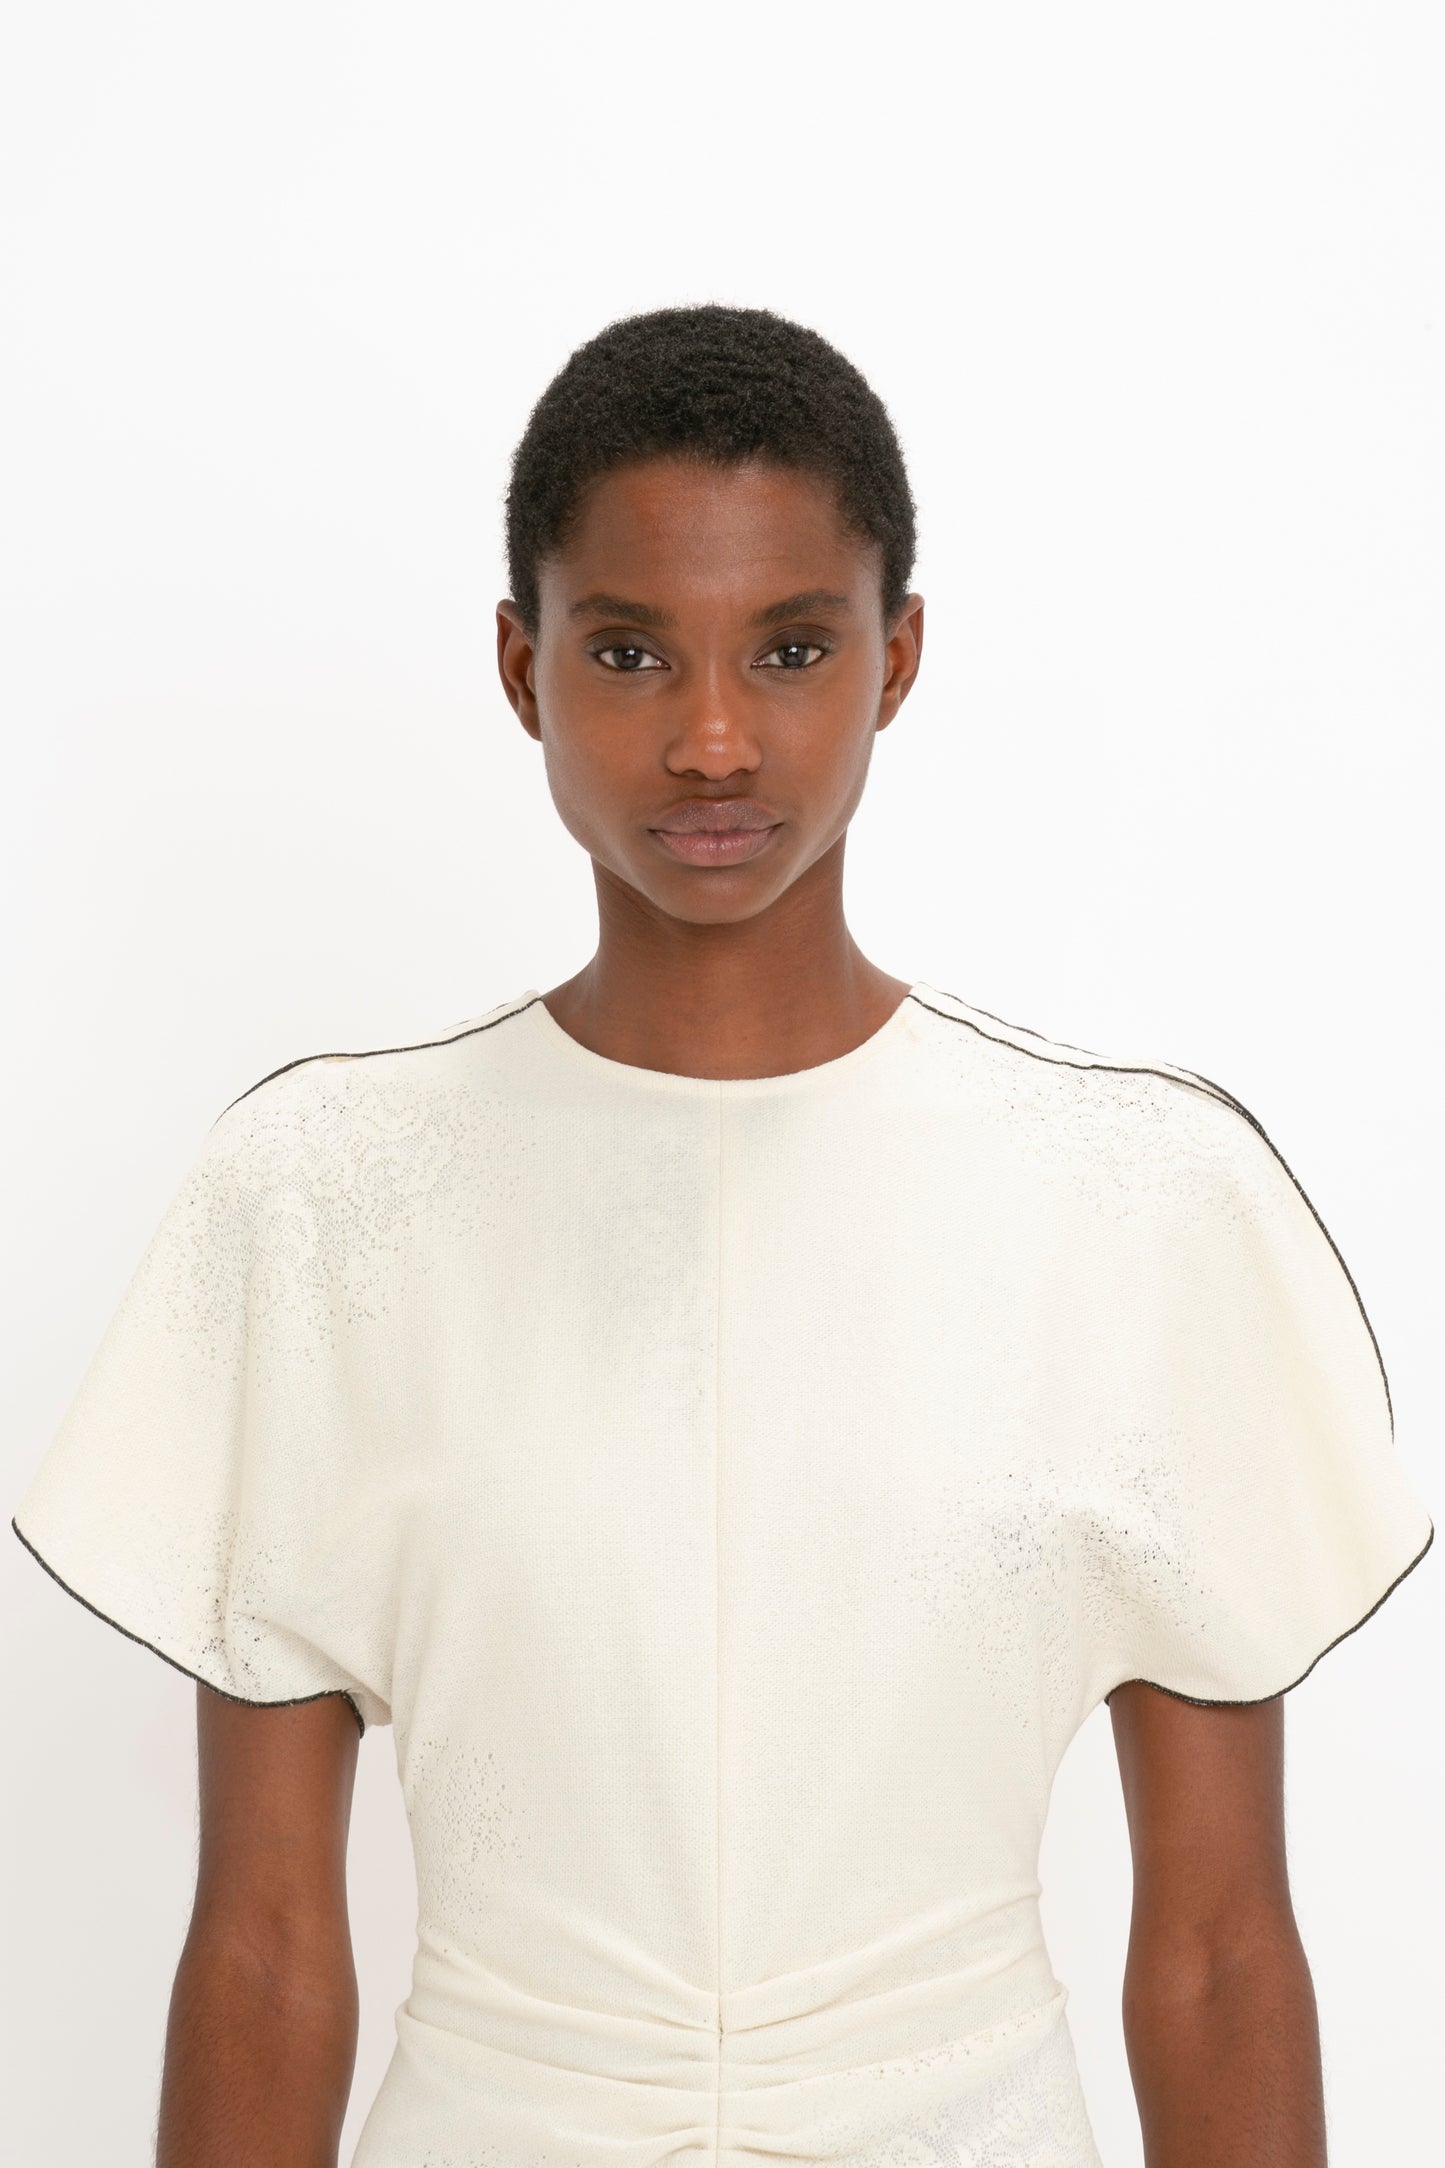 A young black woman wearing a Victoria Beckham Gathered Waist Midi Dress In Cream stands against a white background, looking directly at the camera.